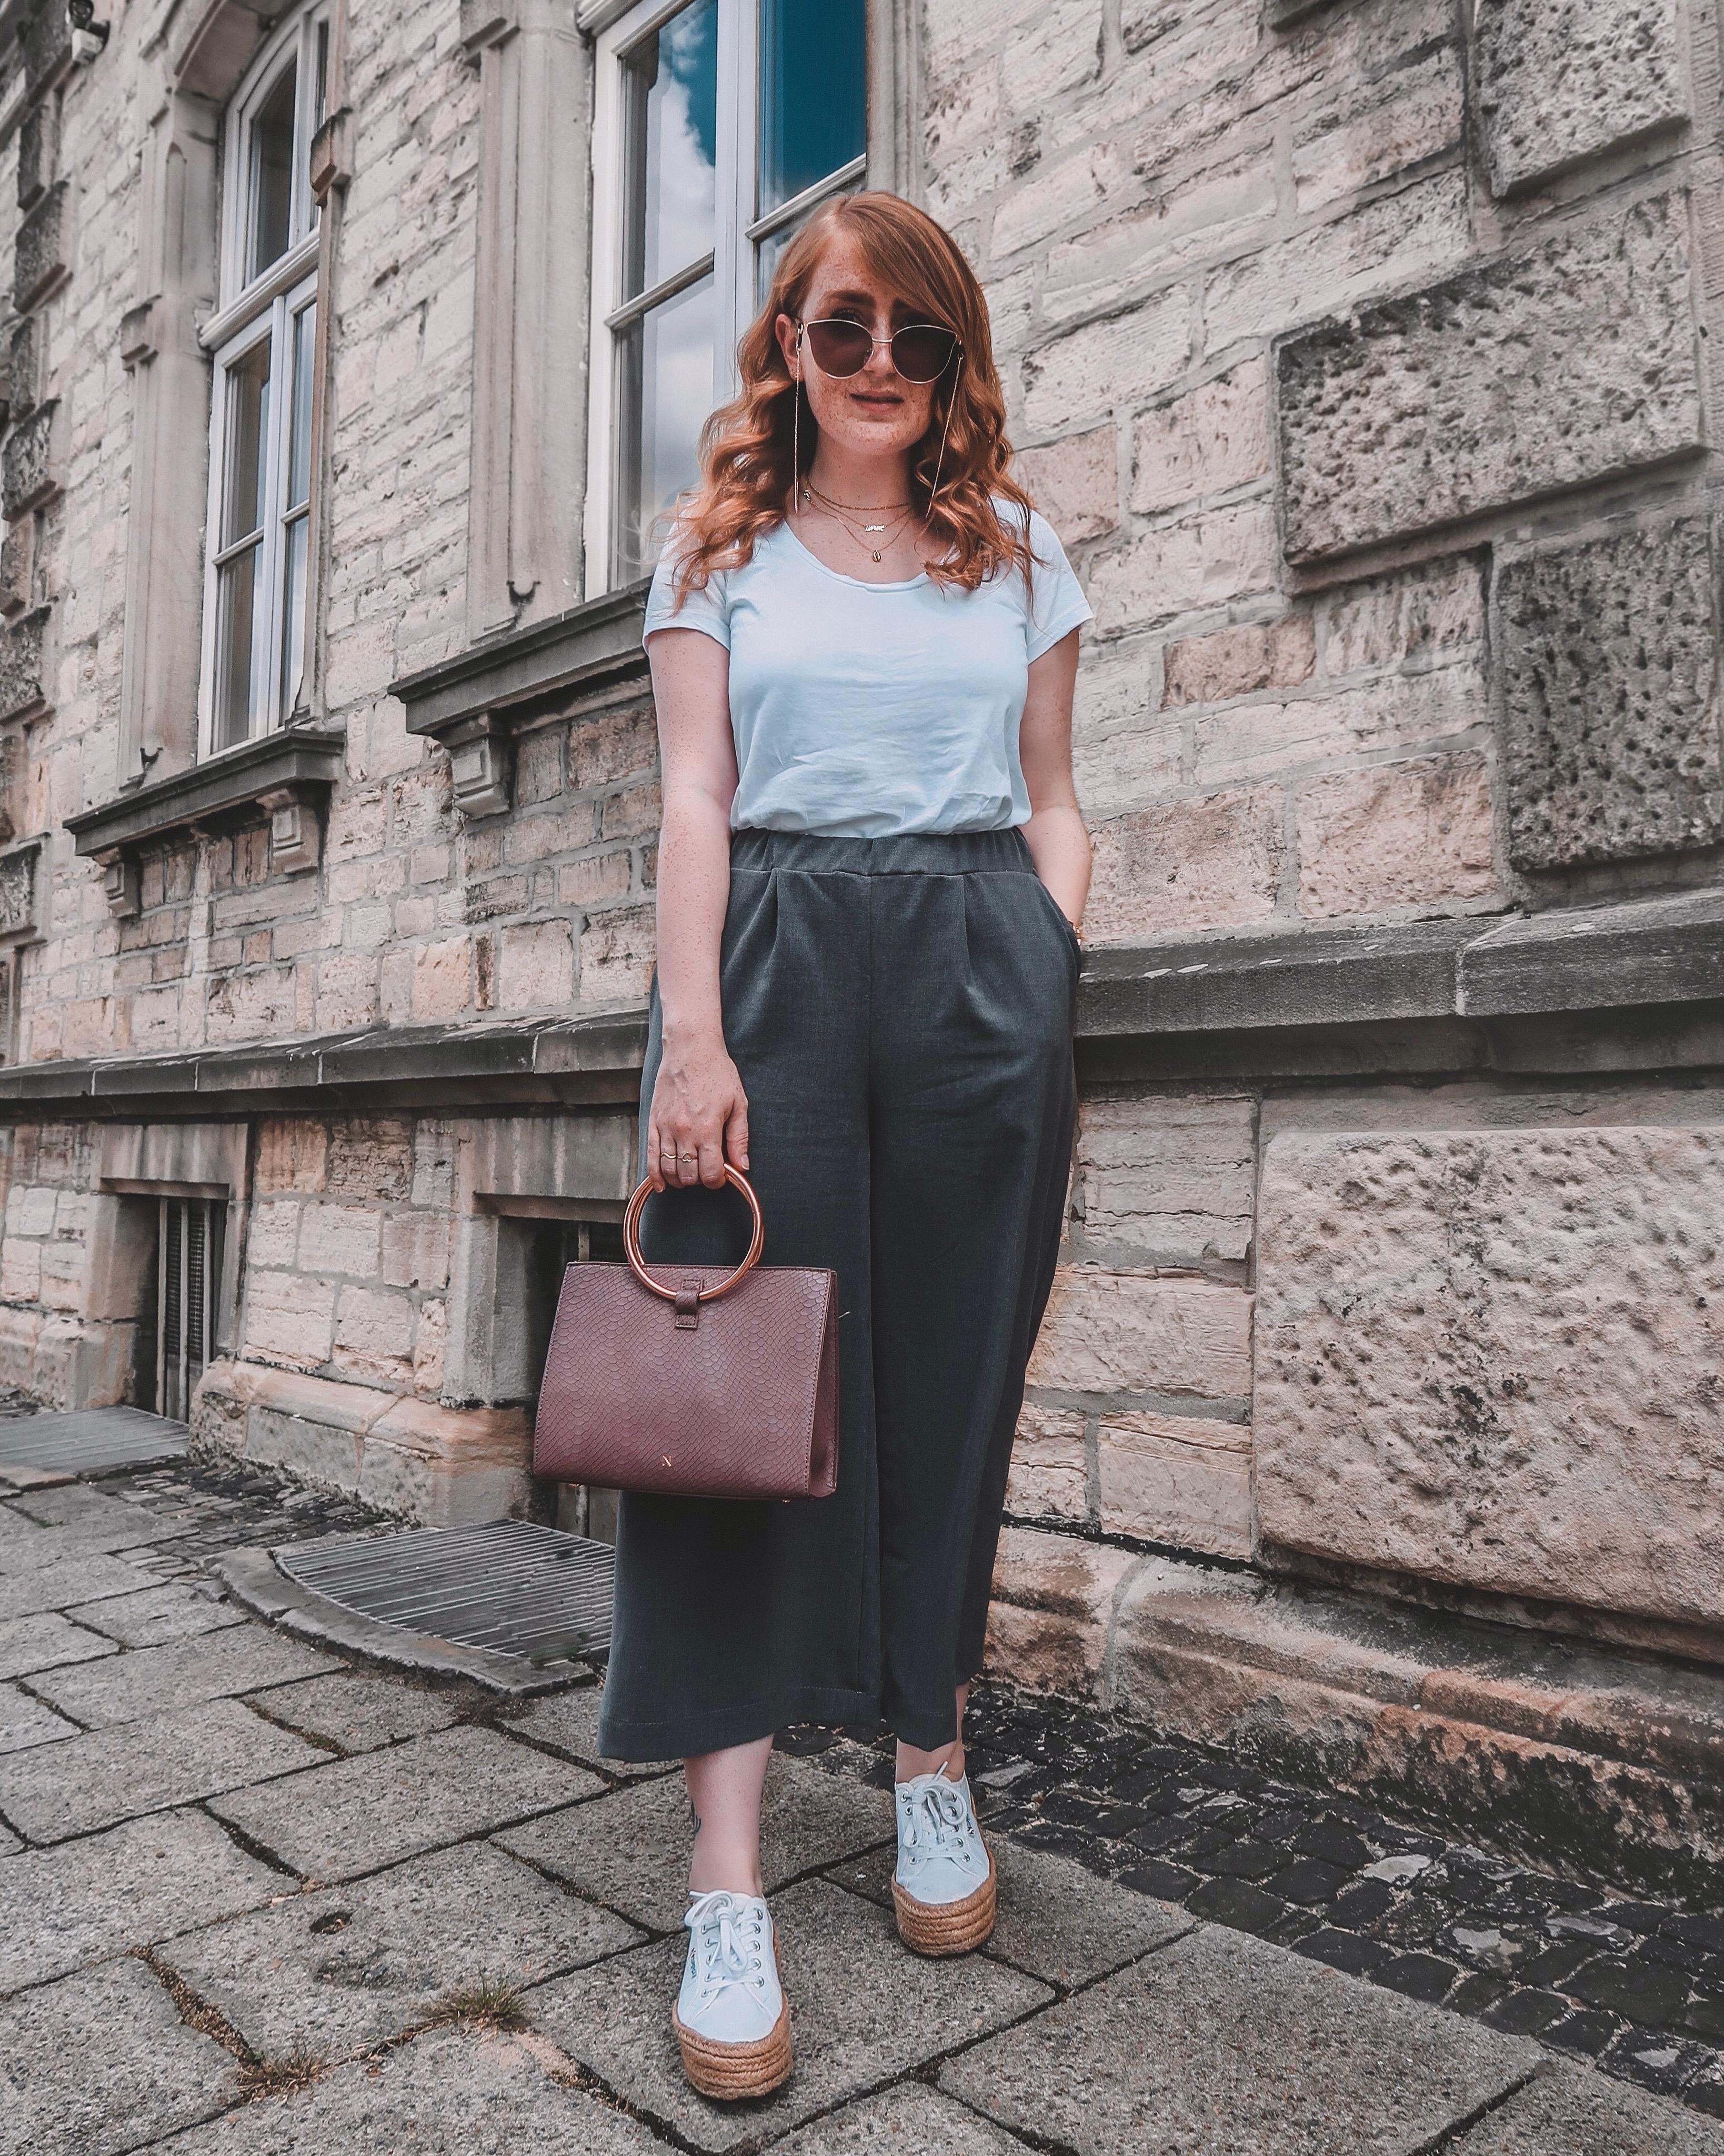 Simpler Culotten-Style 🧡
#fashion #fashionstyle #streetstyle #culotte #summerlook #casuallook